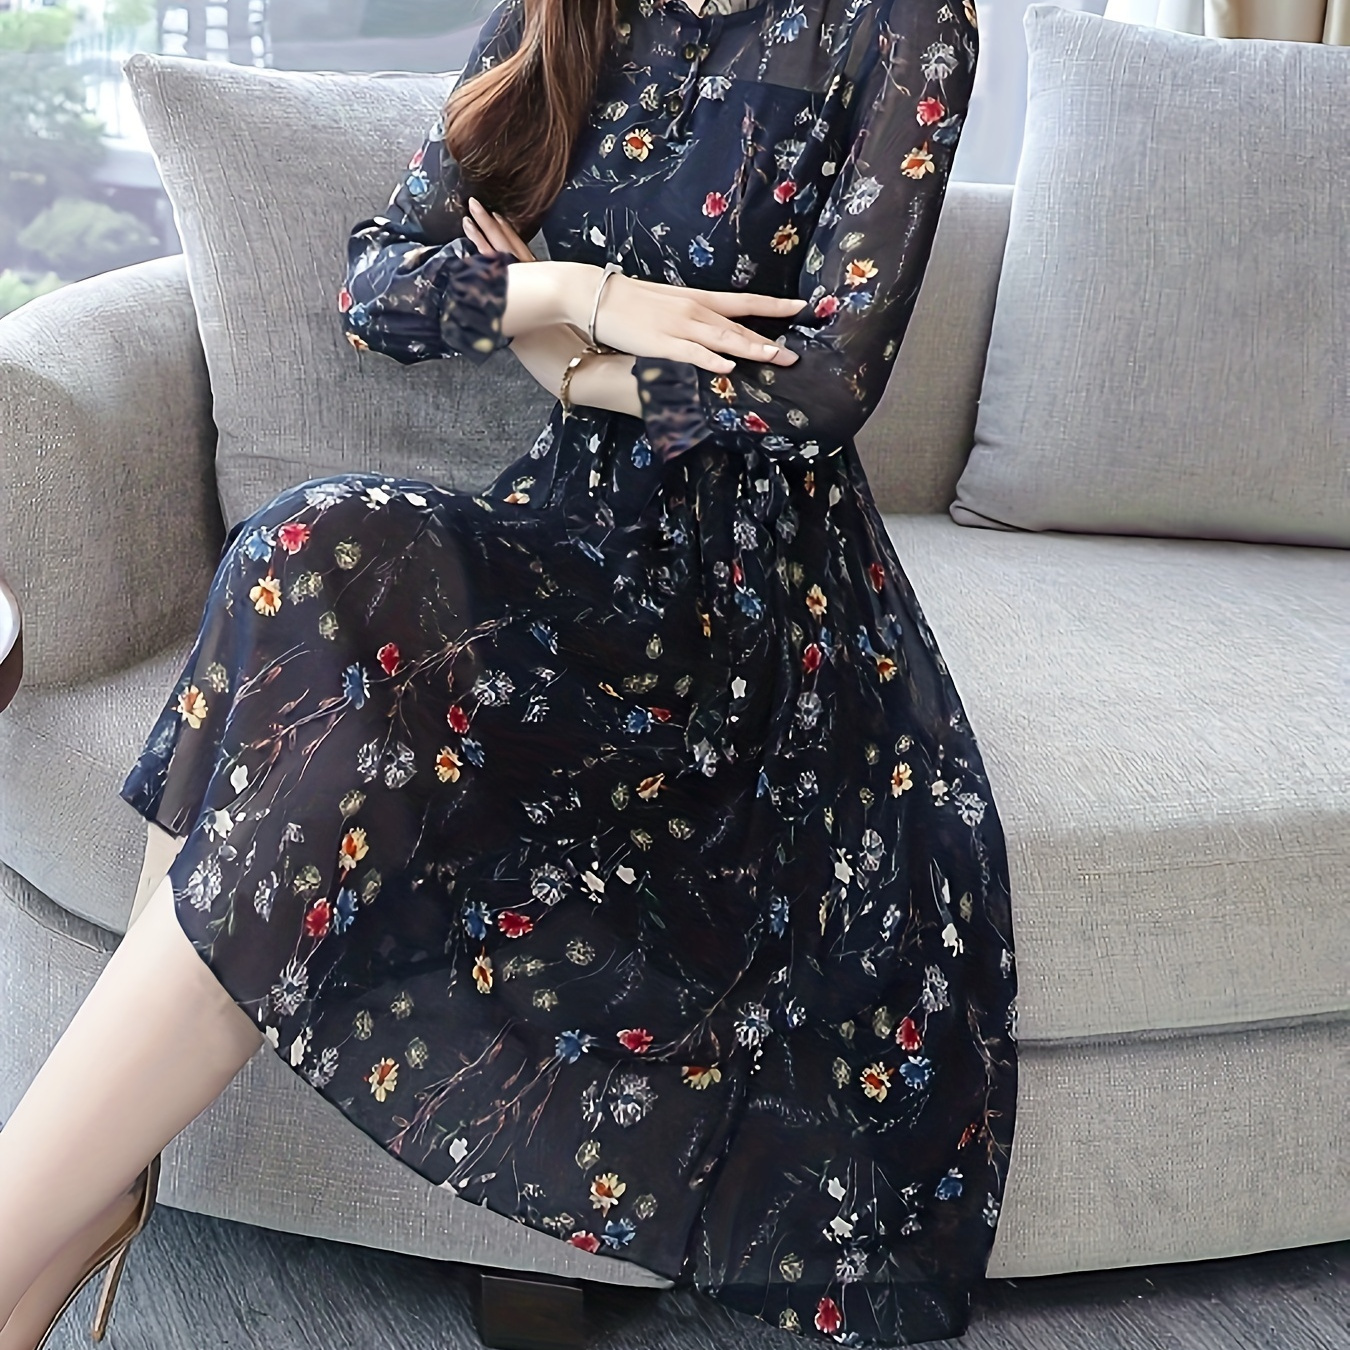 

Floral Print Belted Dress, Elegant 3/4 Sleeve Every Day Dress, Women's Clothing